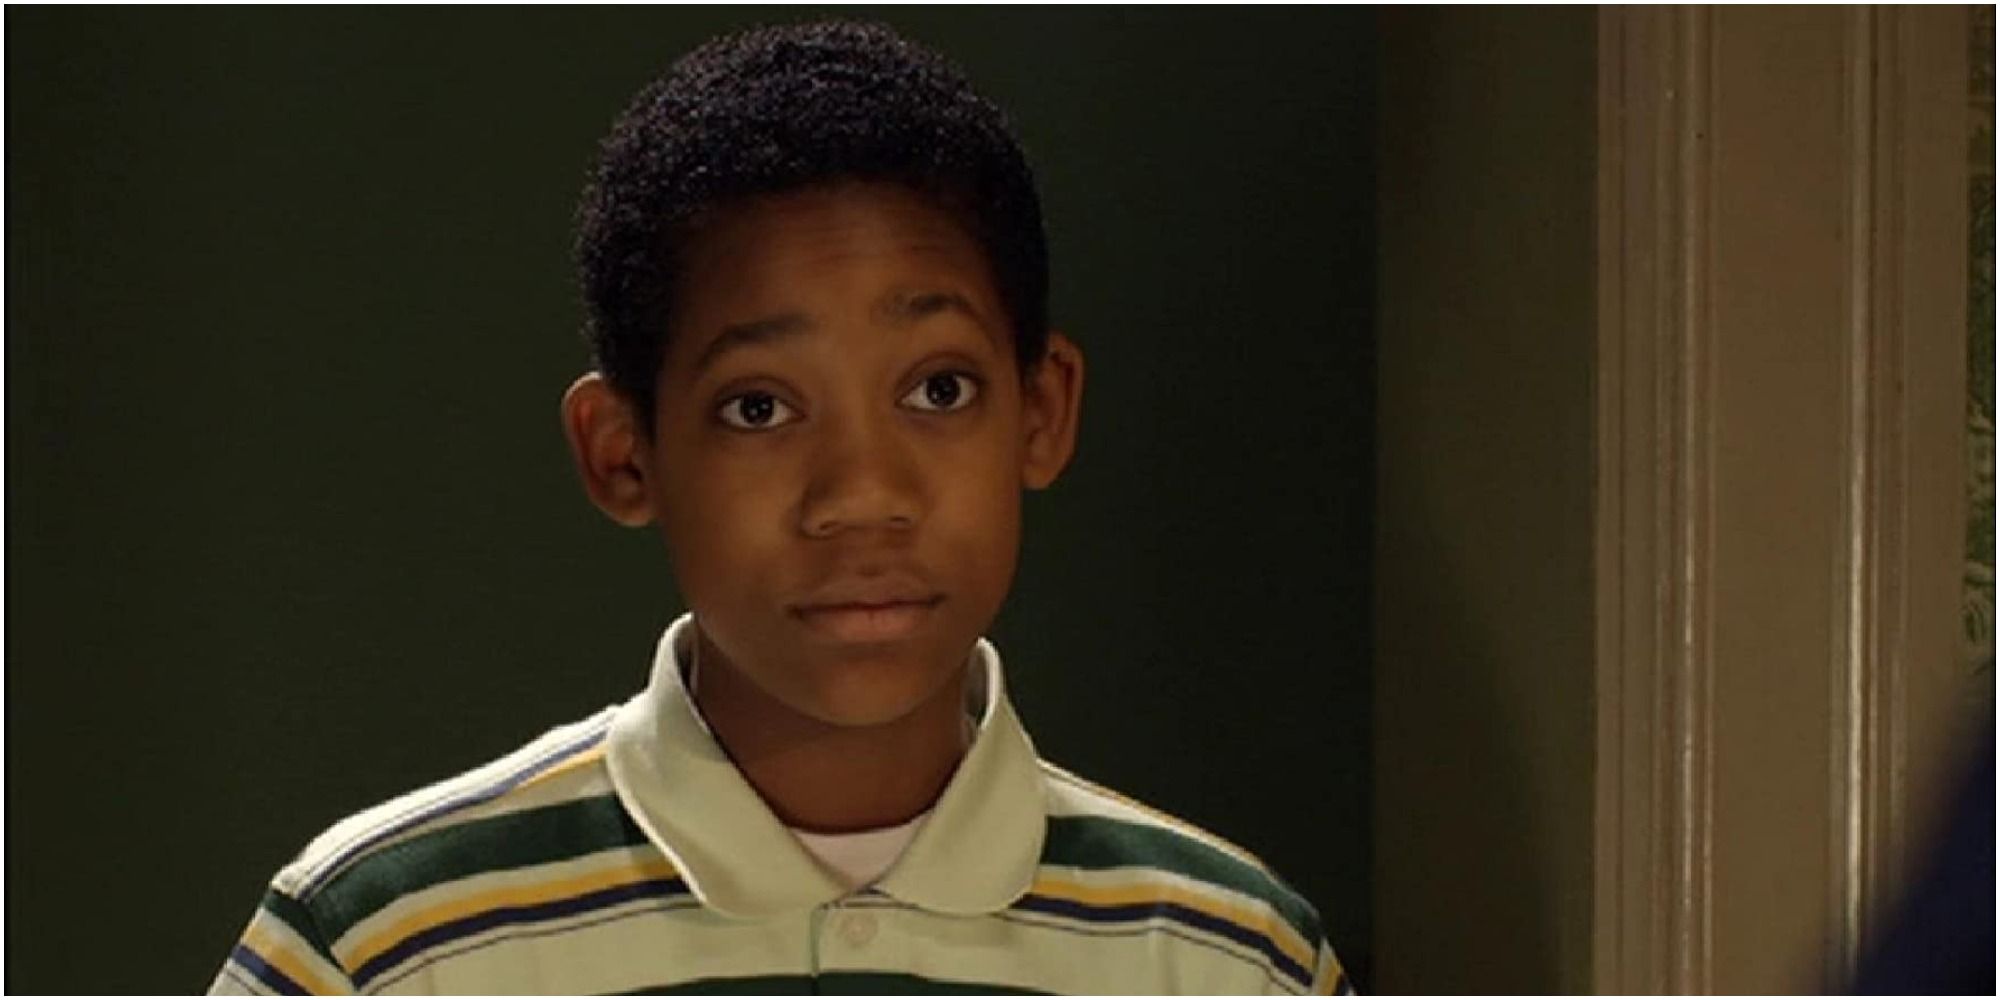 Chris from Everybody Hates Chris looking blankly at someone.